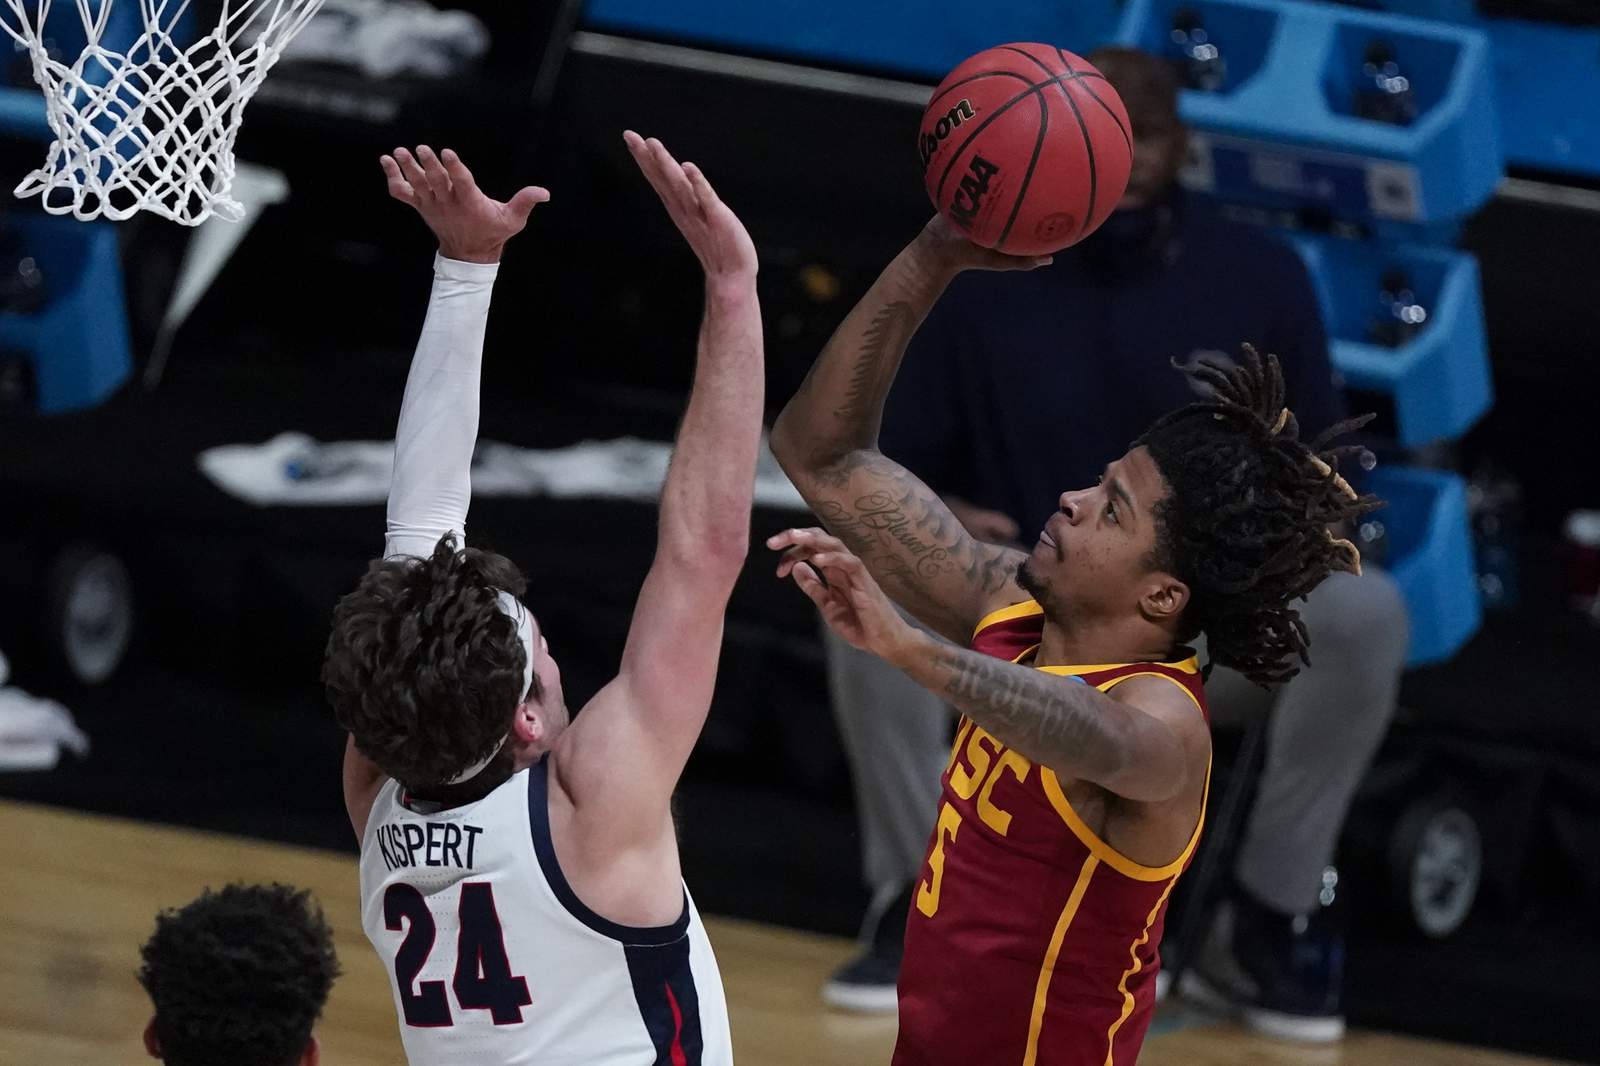 Quite a show: Zags stay undefeated with 85-66 win over USC